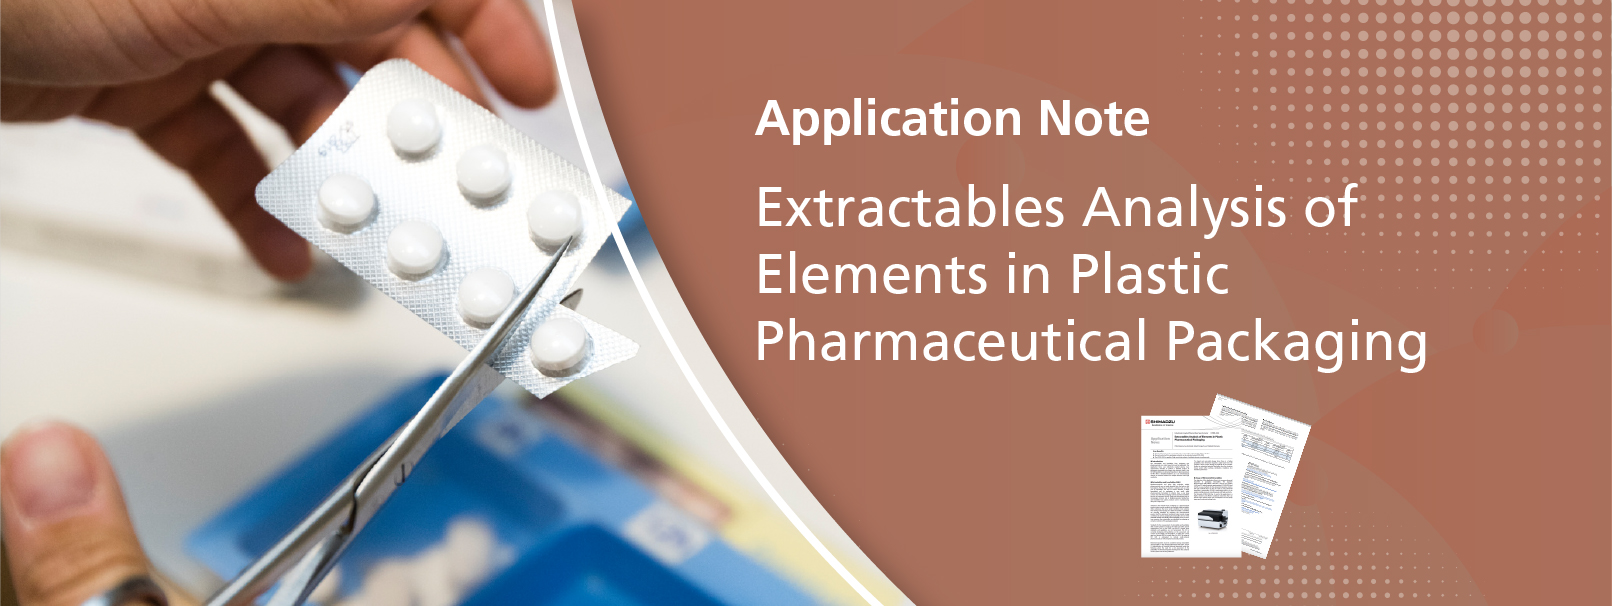 Extractables Analysis of Elements in Plastic Pharmaceutical Packaging